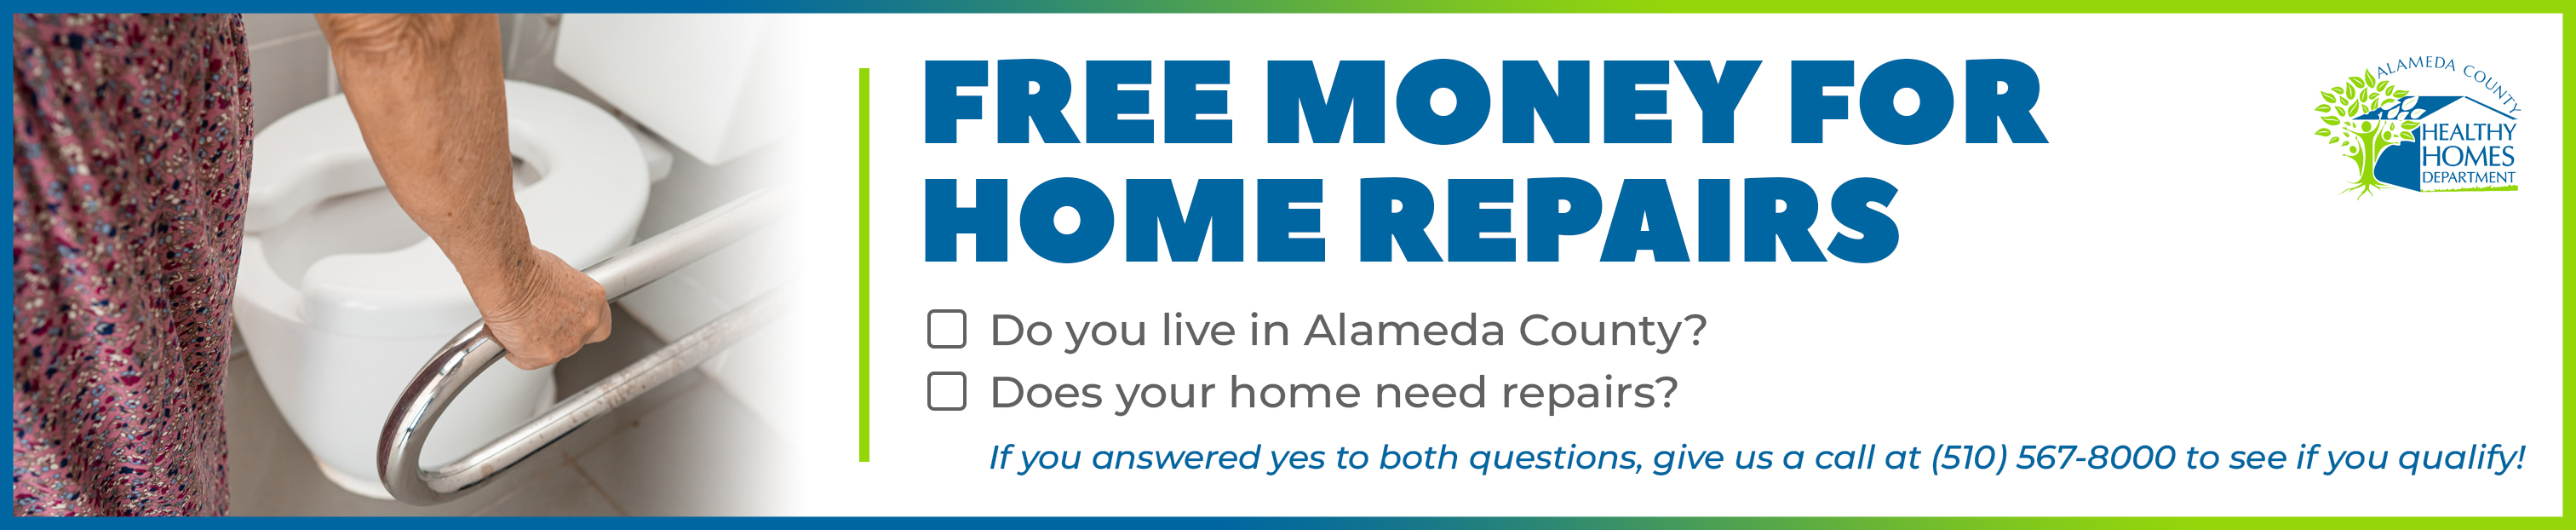 Free money for home repairs, click the link to see if you qualify and fill out the contact survey